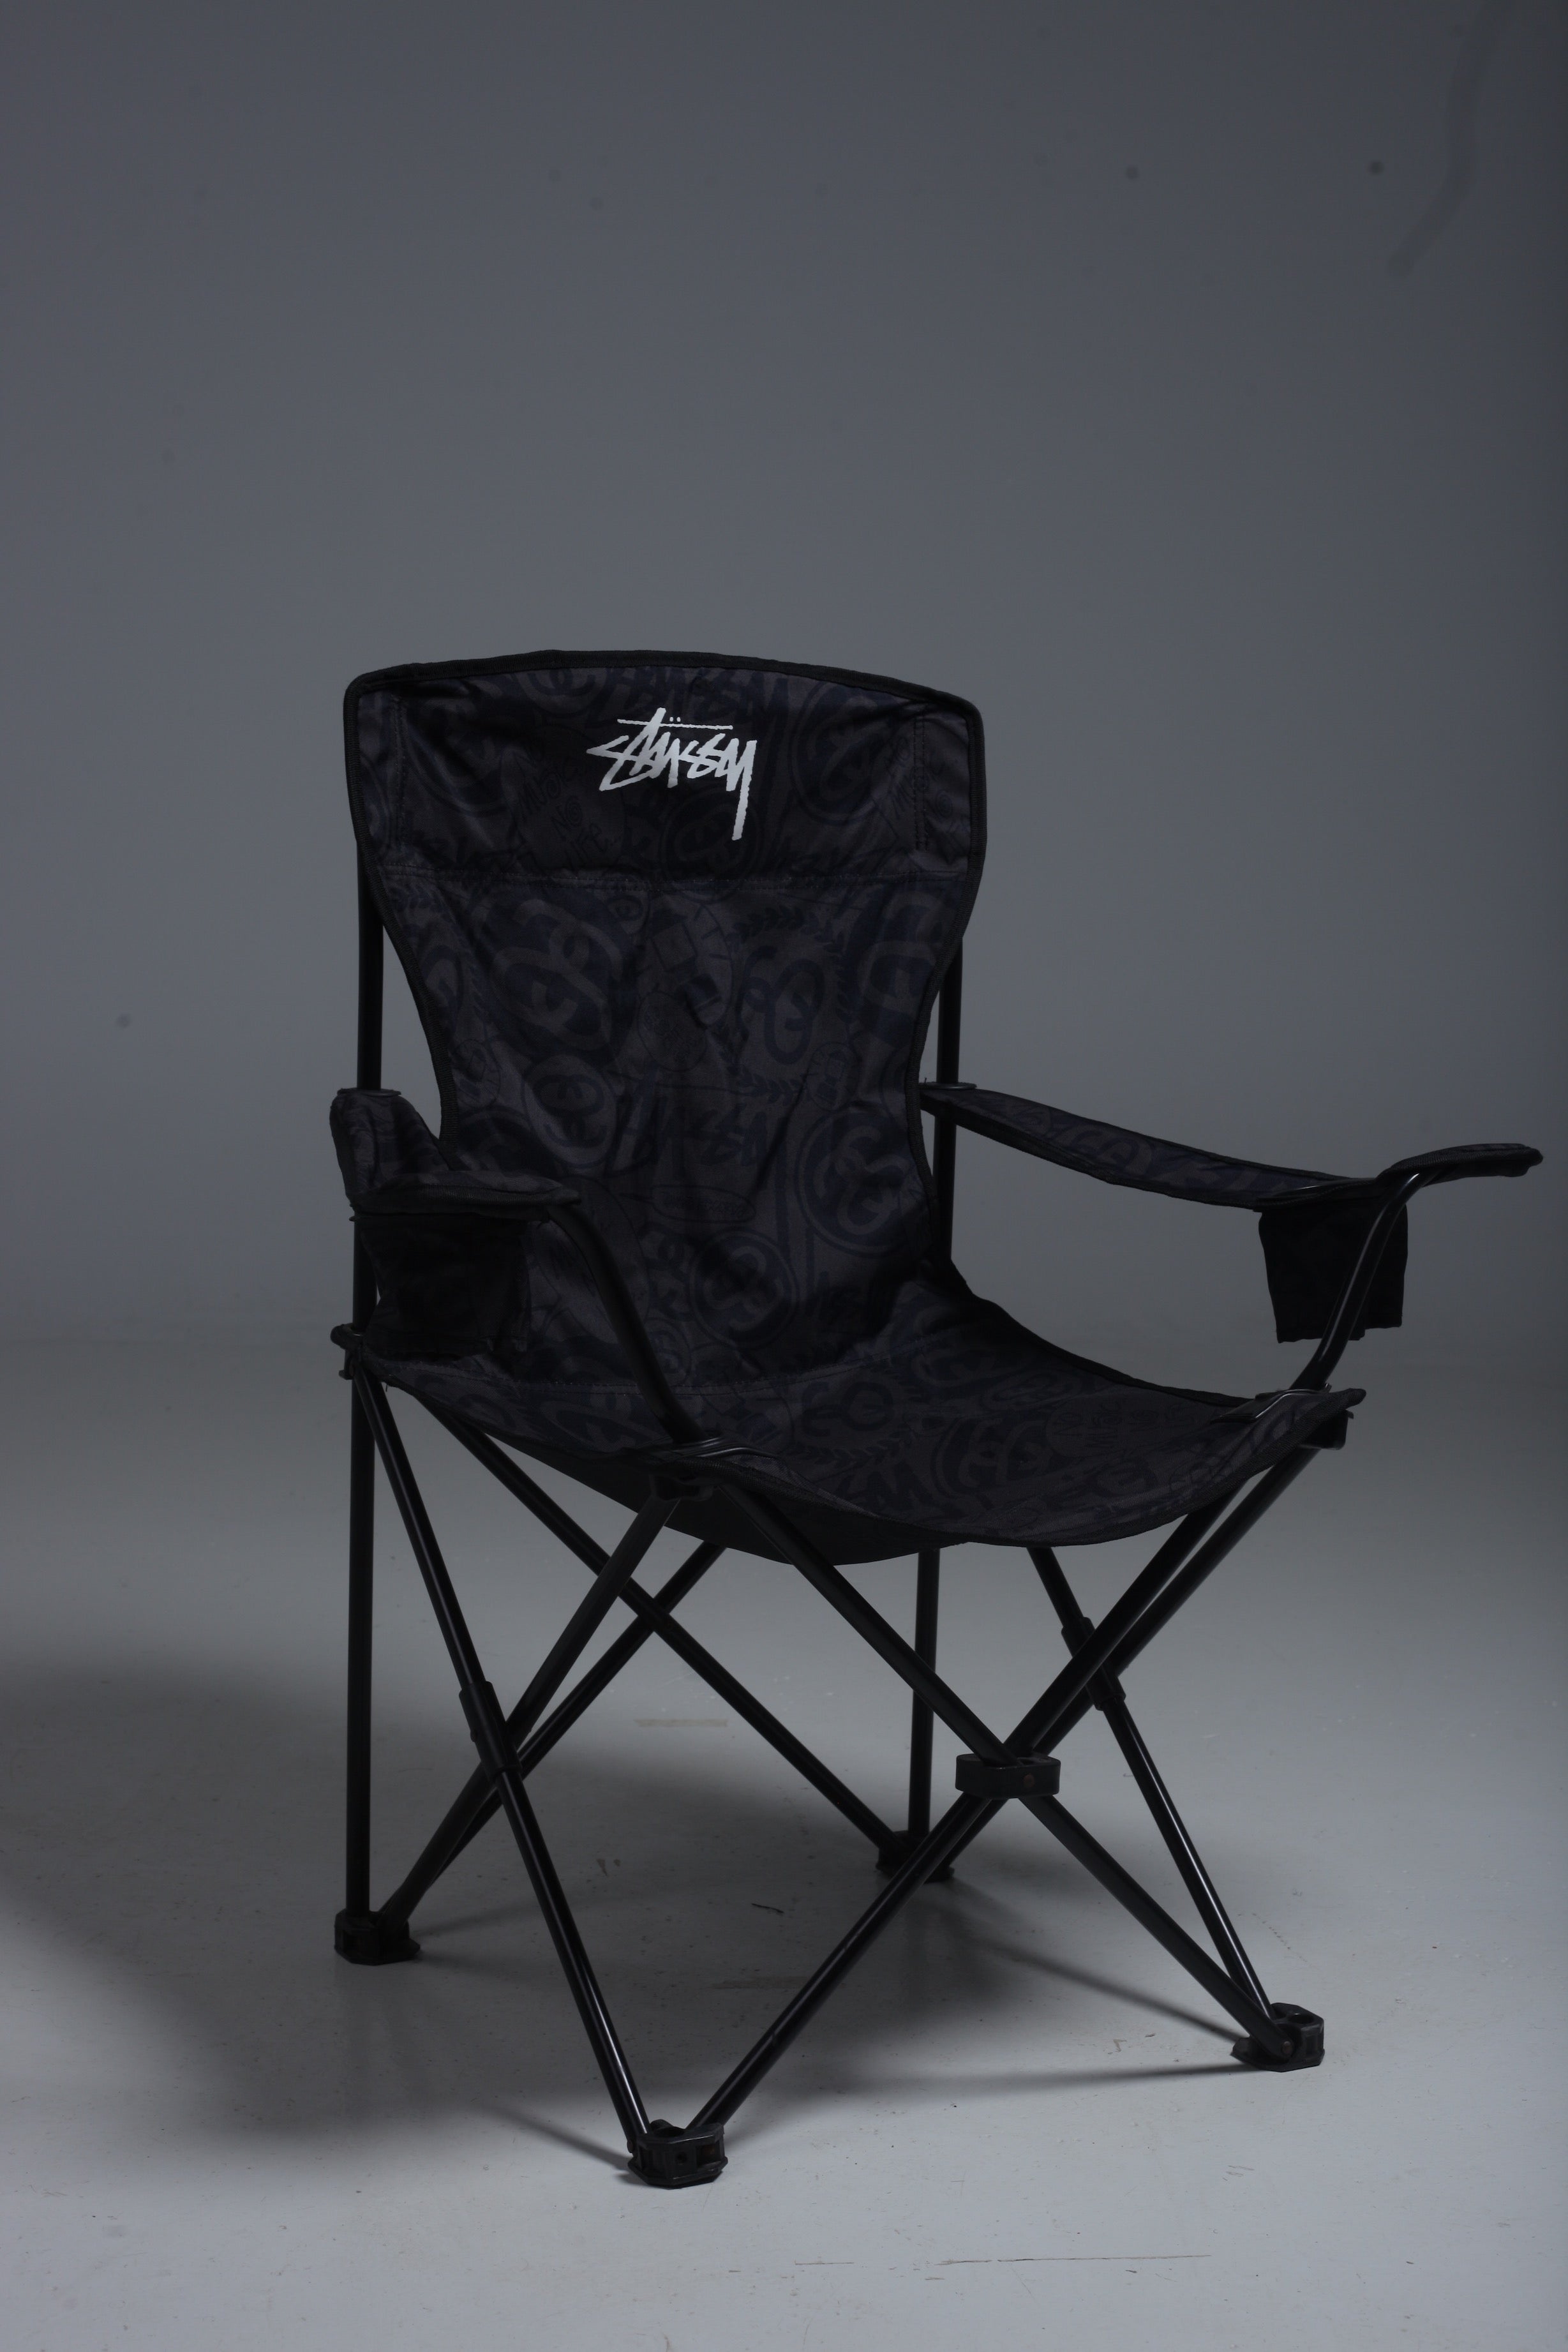 Stussy x Tower Records x Coleman Camping Chair